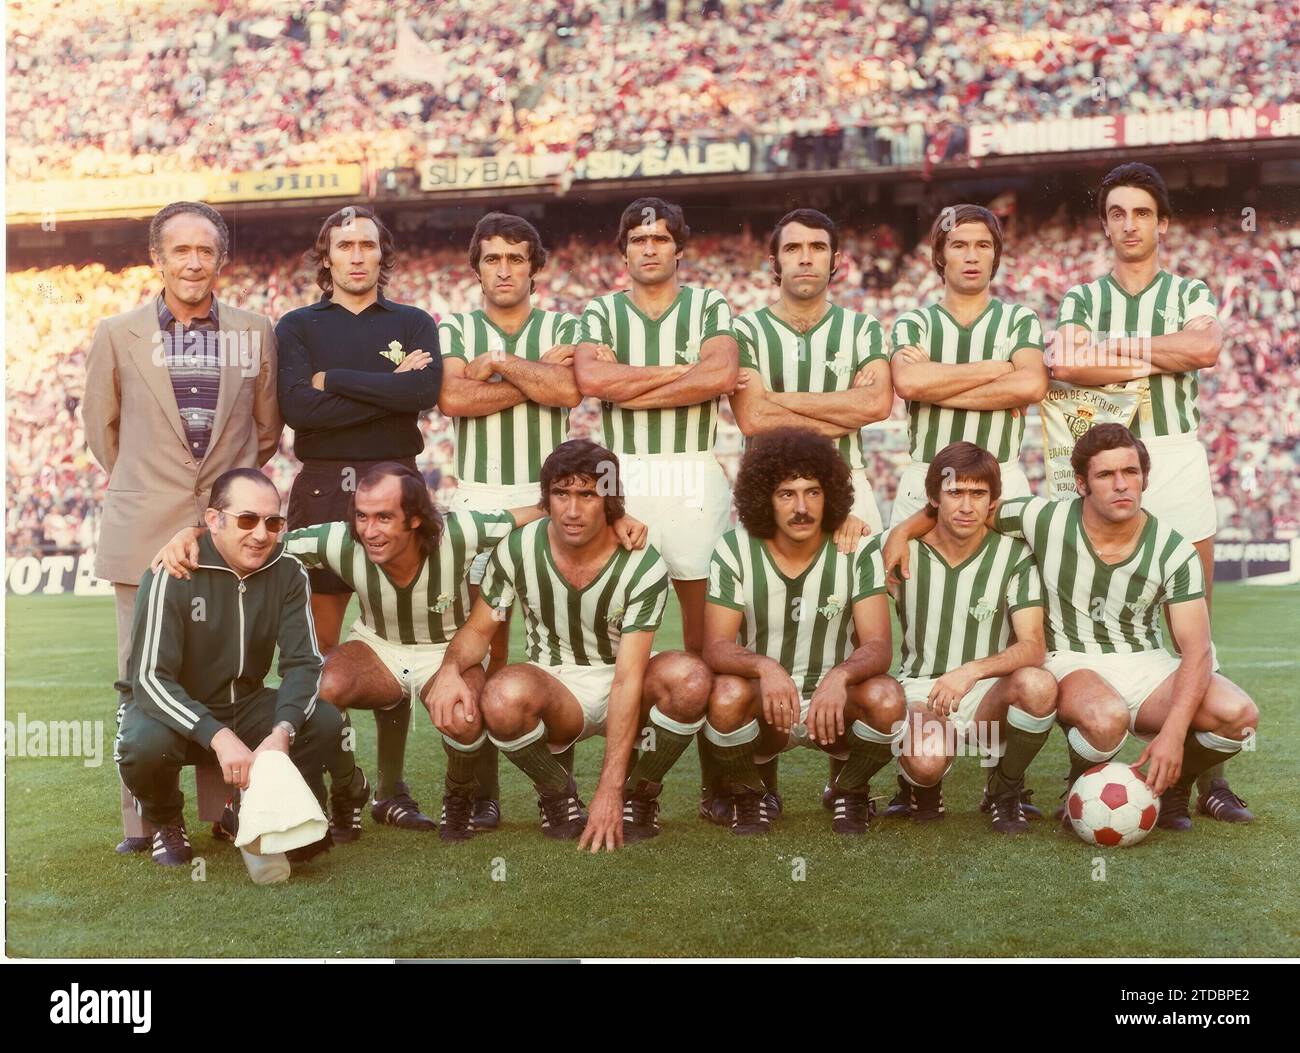 Betis team that played the final of the Copa del Rey in 1977, the first under the name of HM King Juan Carlos I. It was played at the Vicente Calderón stadium in Madrid on June 25, 1977 with Athletic de Bilbao as a rival. The coach, Rafael Iriondo, and the masseuse, Vicente Montiel (crouching) pose with the players. They are standing, from left to right, Esnaola, Bizcocho, Biosca, Sabaté, López and Cobo, and crouching, García Soriano, Alabanda, Megido, Cardeñosa and Benítez. (Photo Ruesga Bono). Credit: Album / Archivo ABC / Ruesga Stock Photo